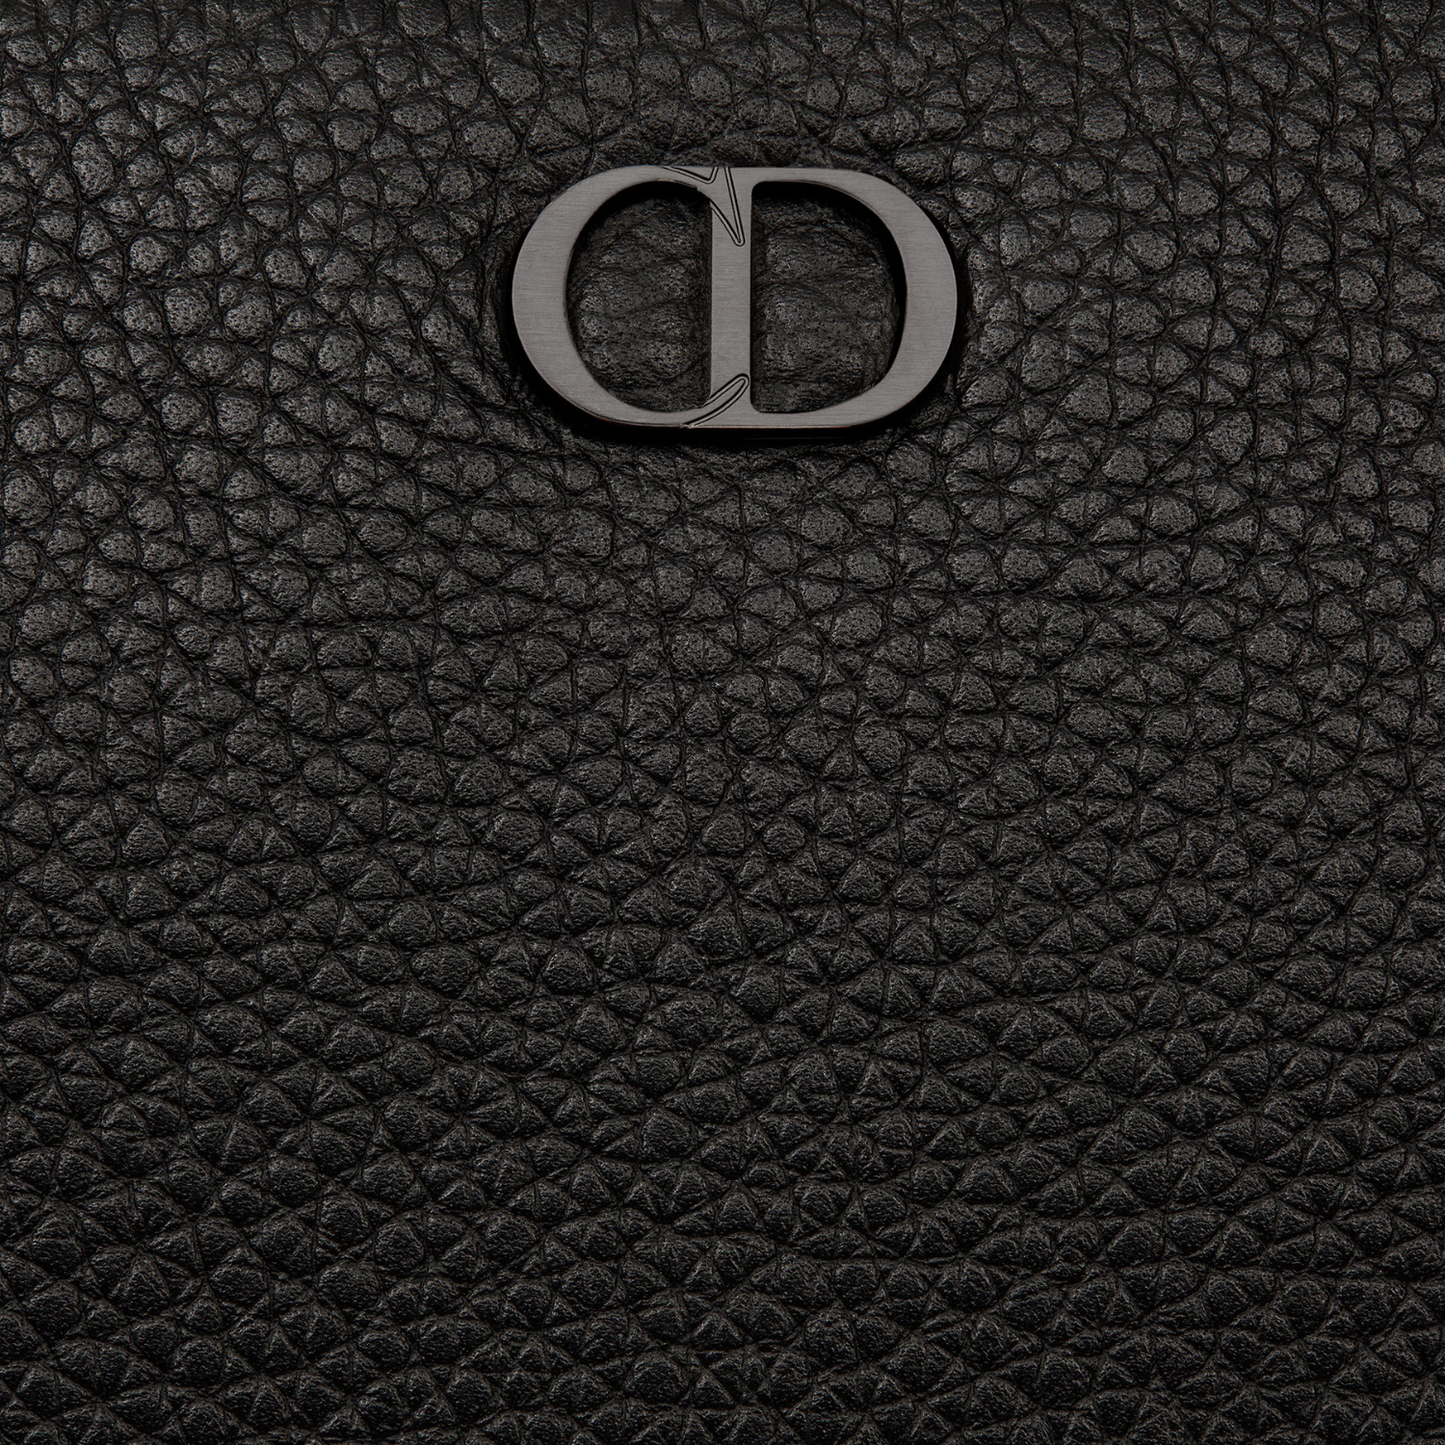 A4 Pouch Black Grained Calfskin with CD Icon Signature